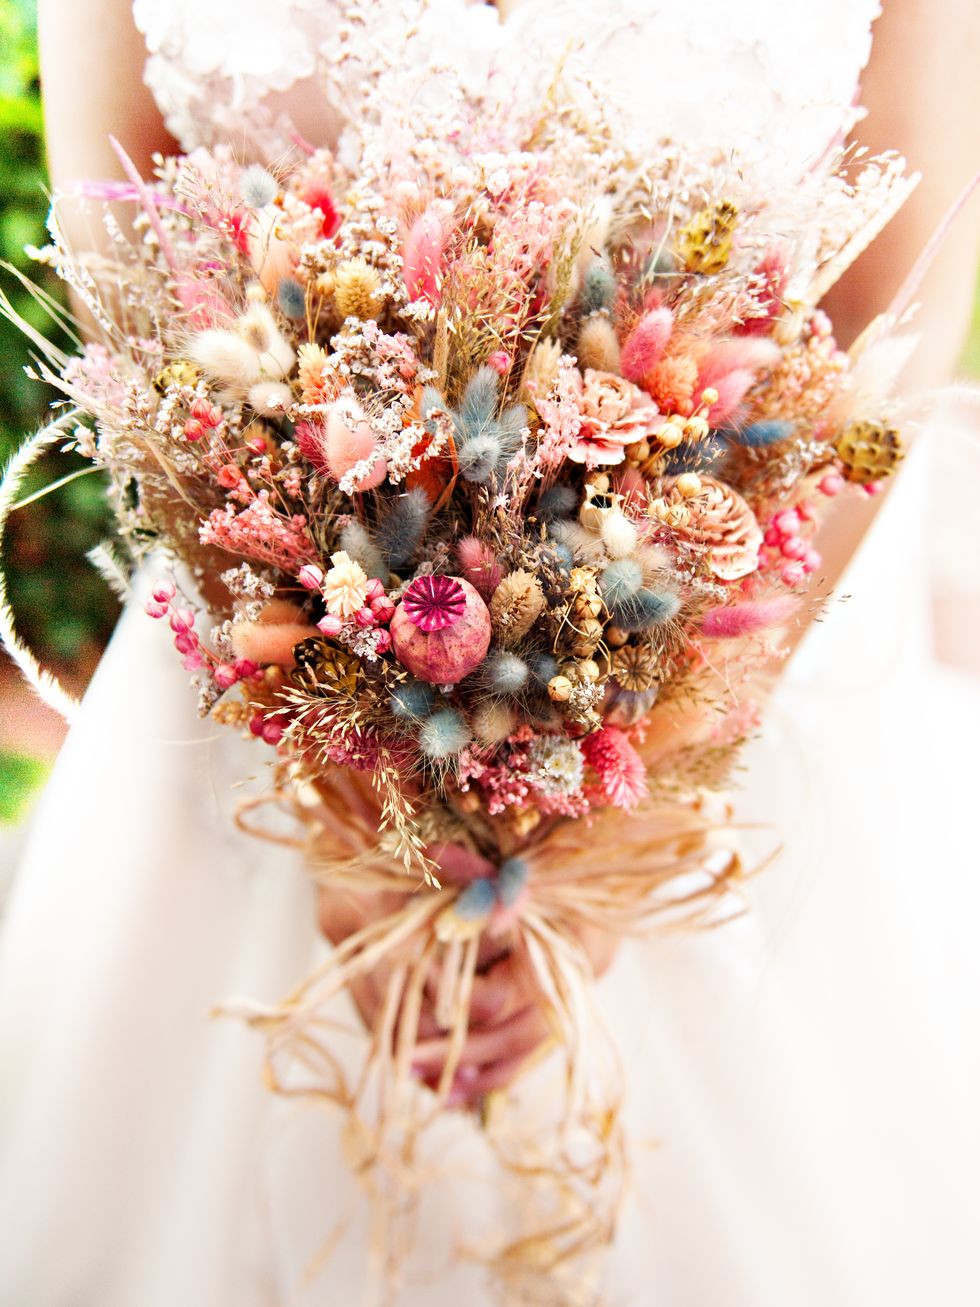 Bride holding her bouquet of dried flowers